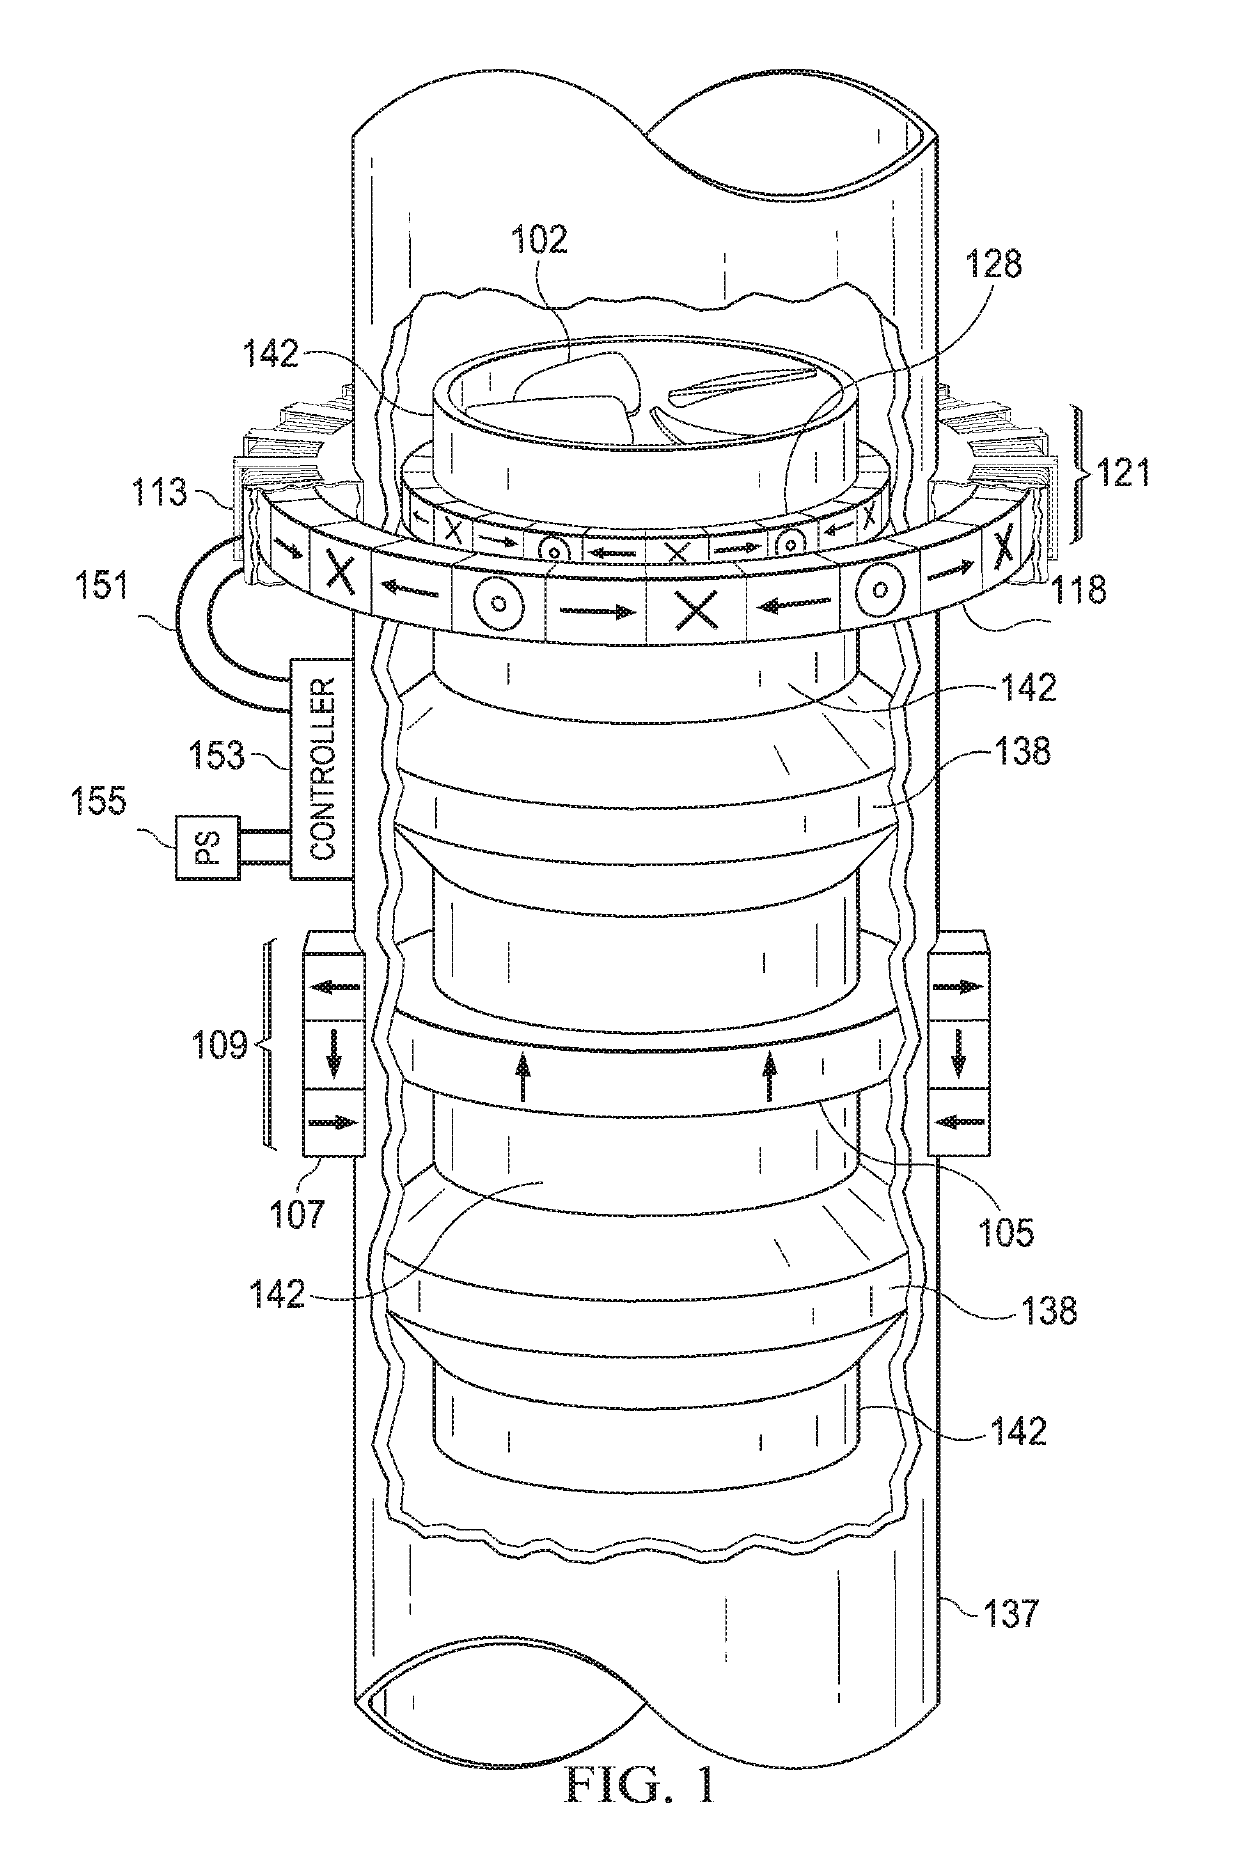 Magnetic-drive axial-flow fluid displacement pump and turbine